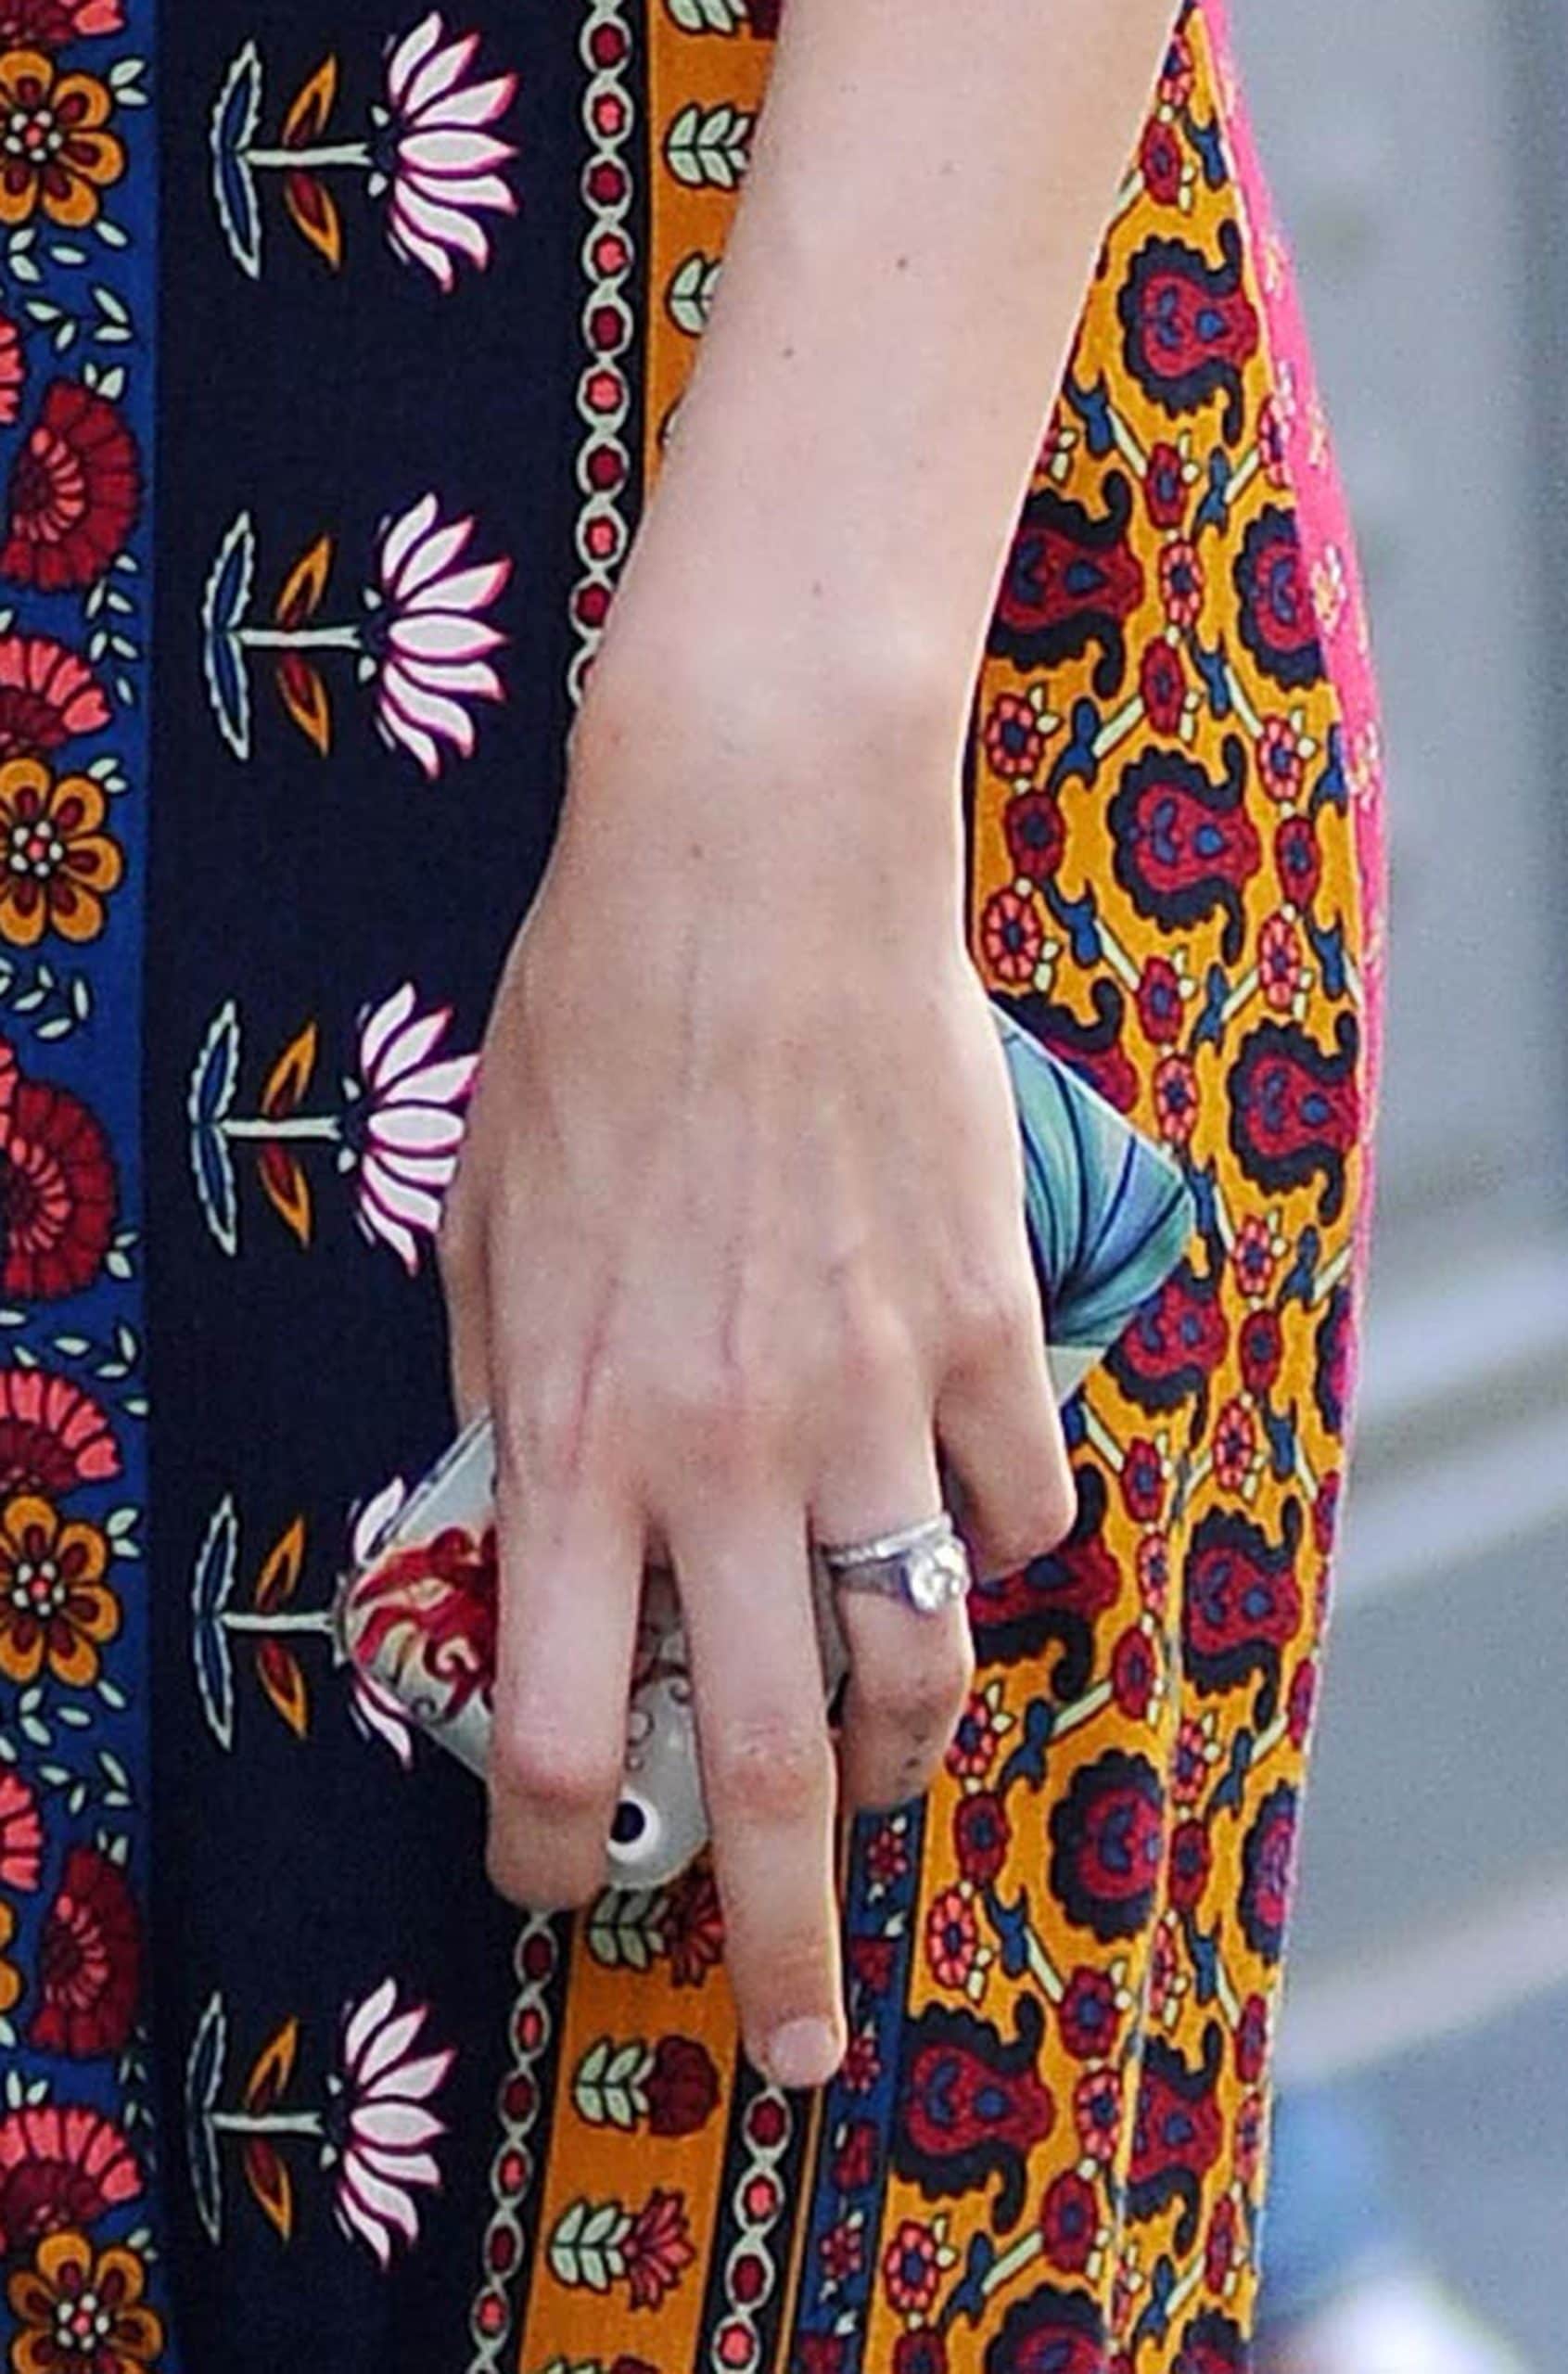 Behati Prinsloo's engagement ring from Adam Levine is a gorgeous and unique vintage piece from the 1930s